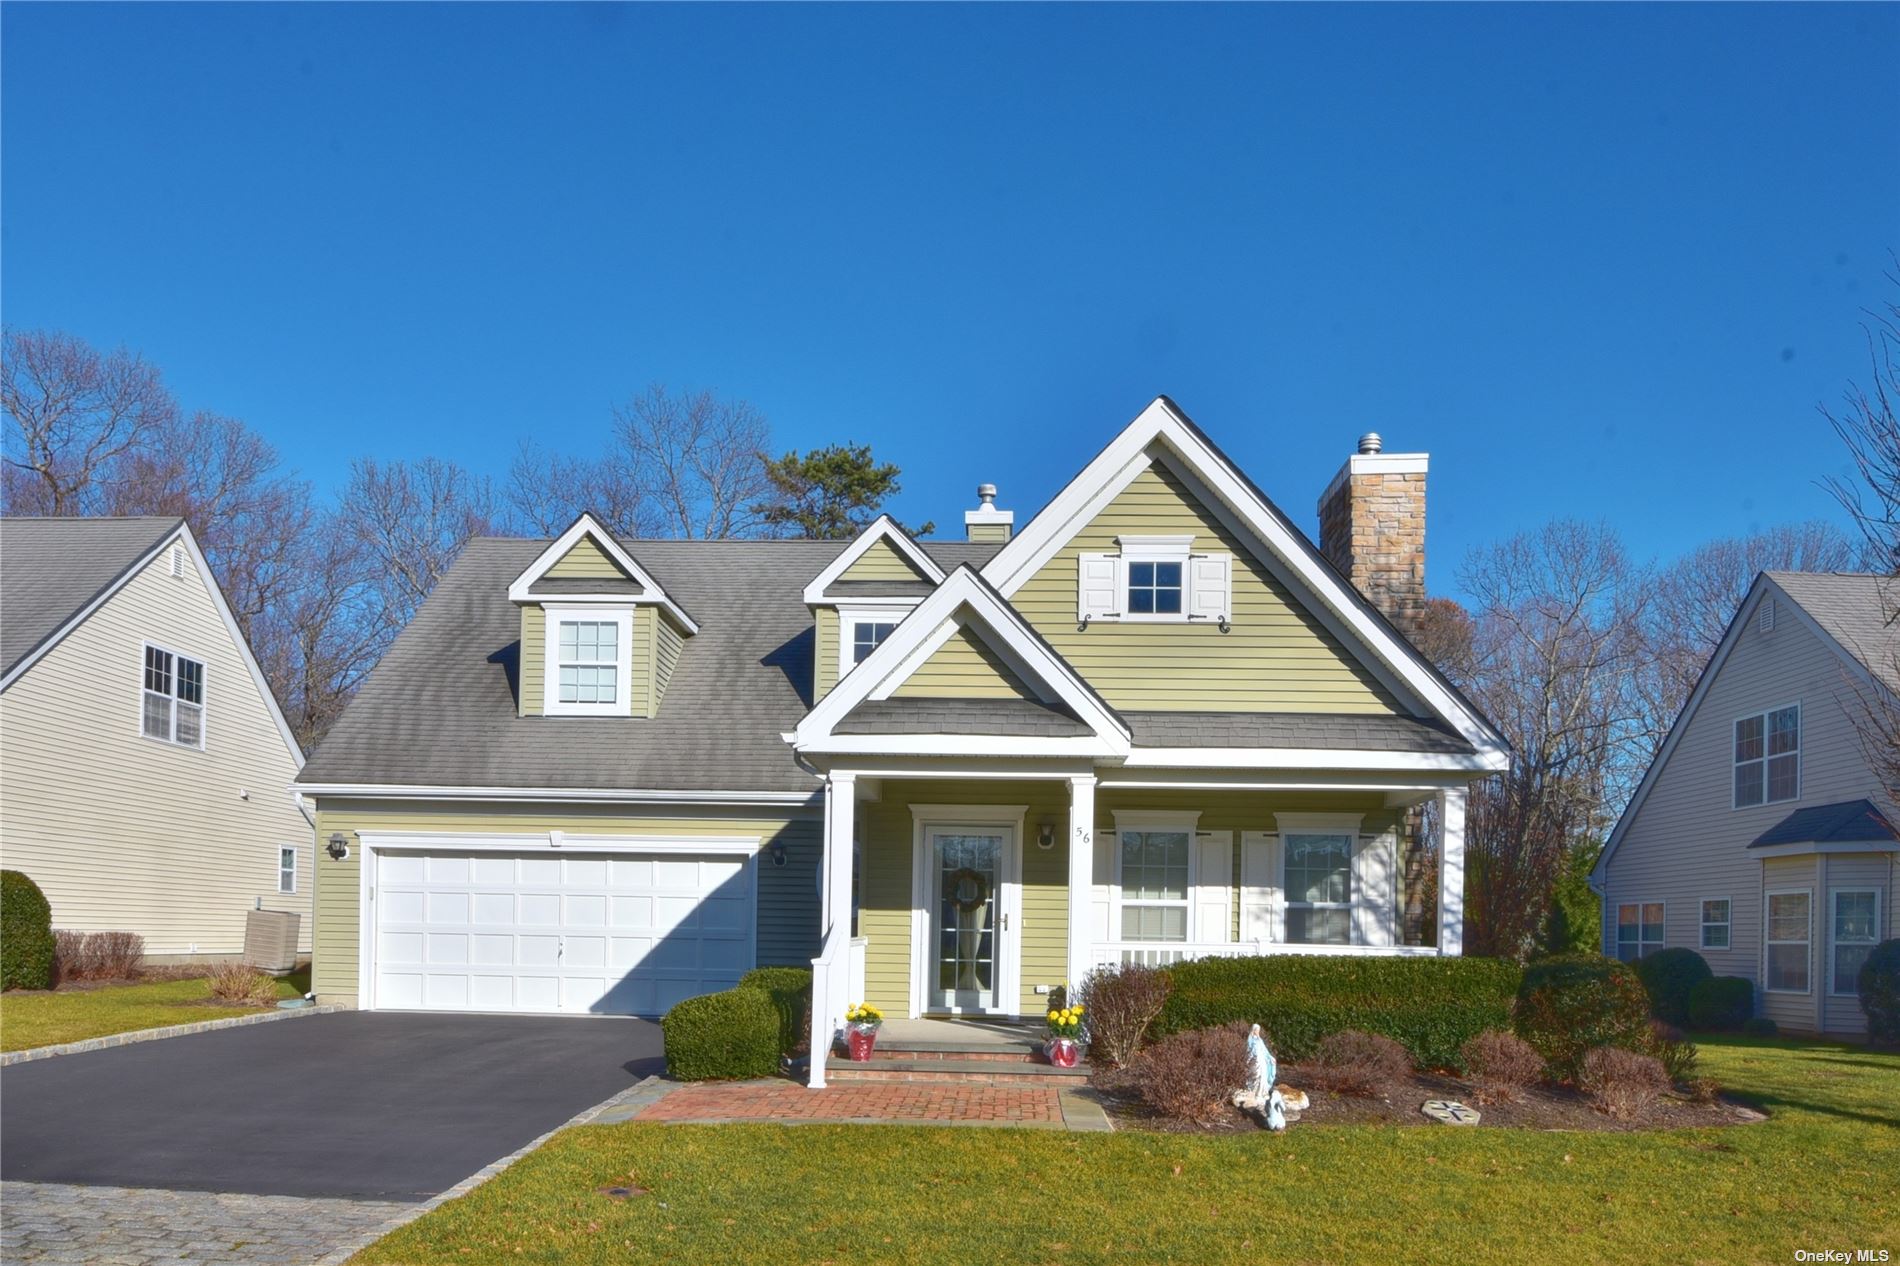 Calverton, NY Real Estate Housing Market & Trends | Coldwell Banker